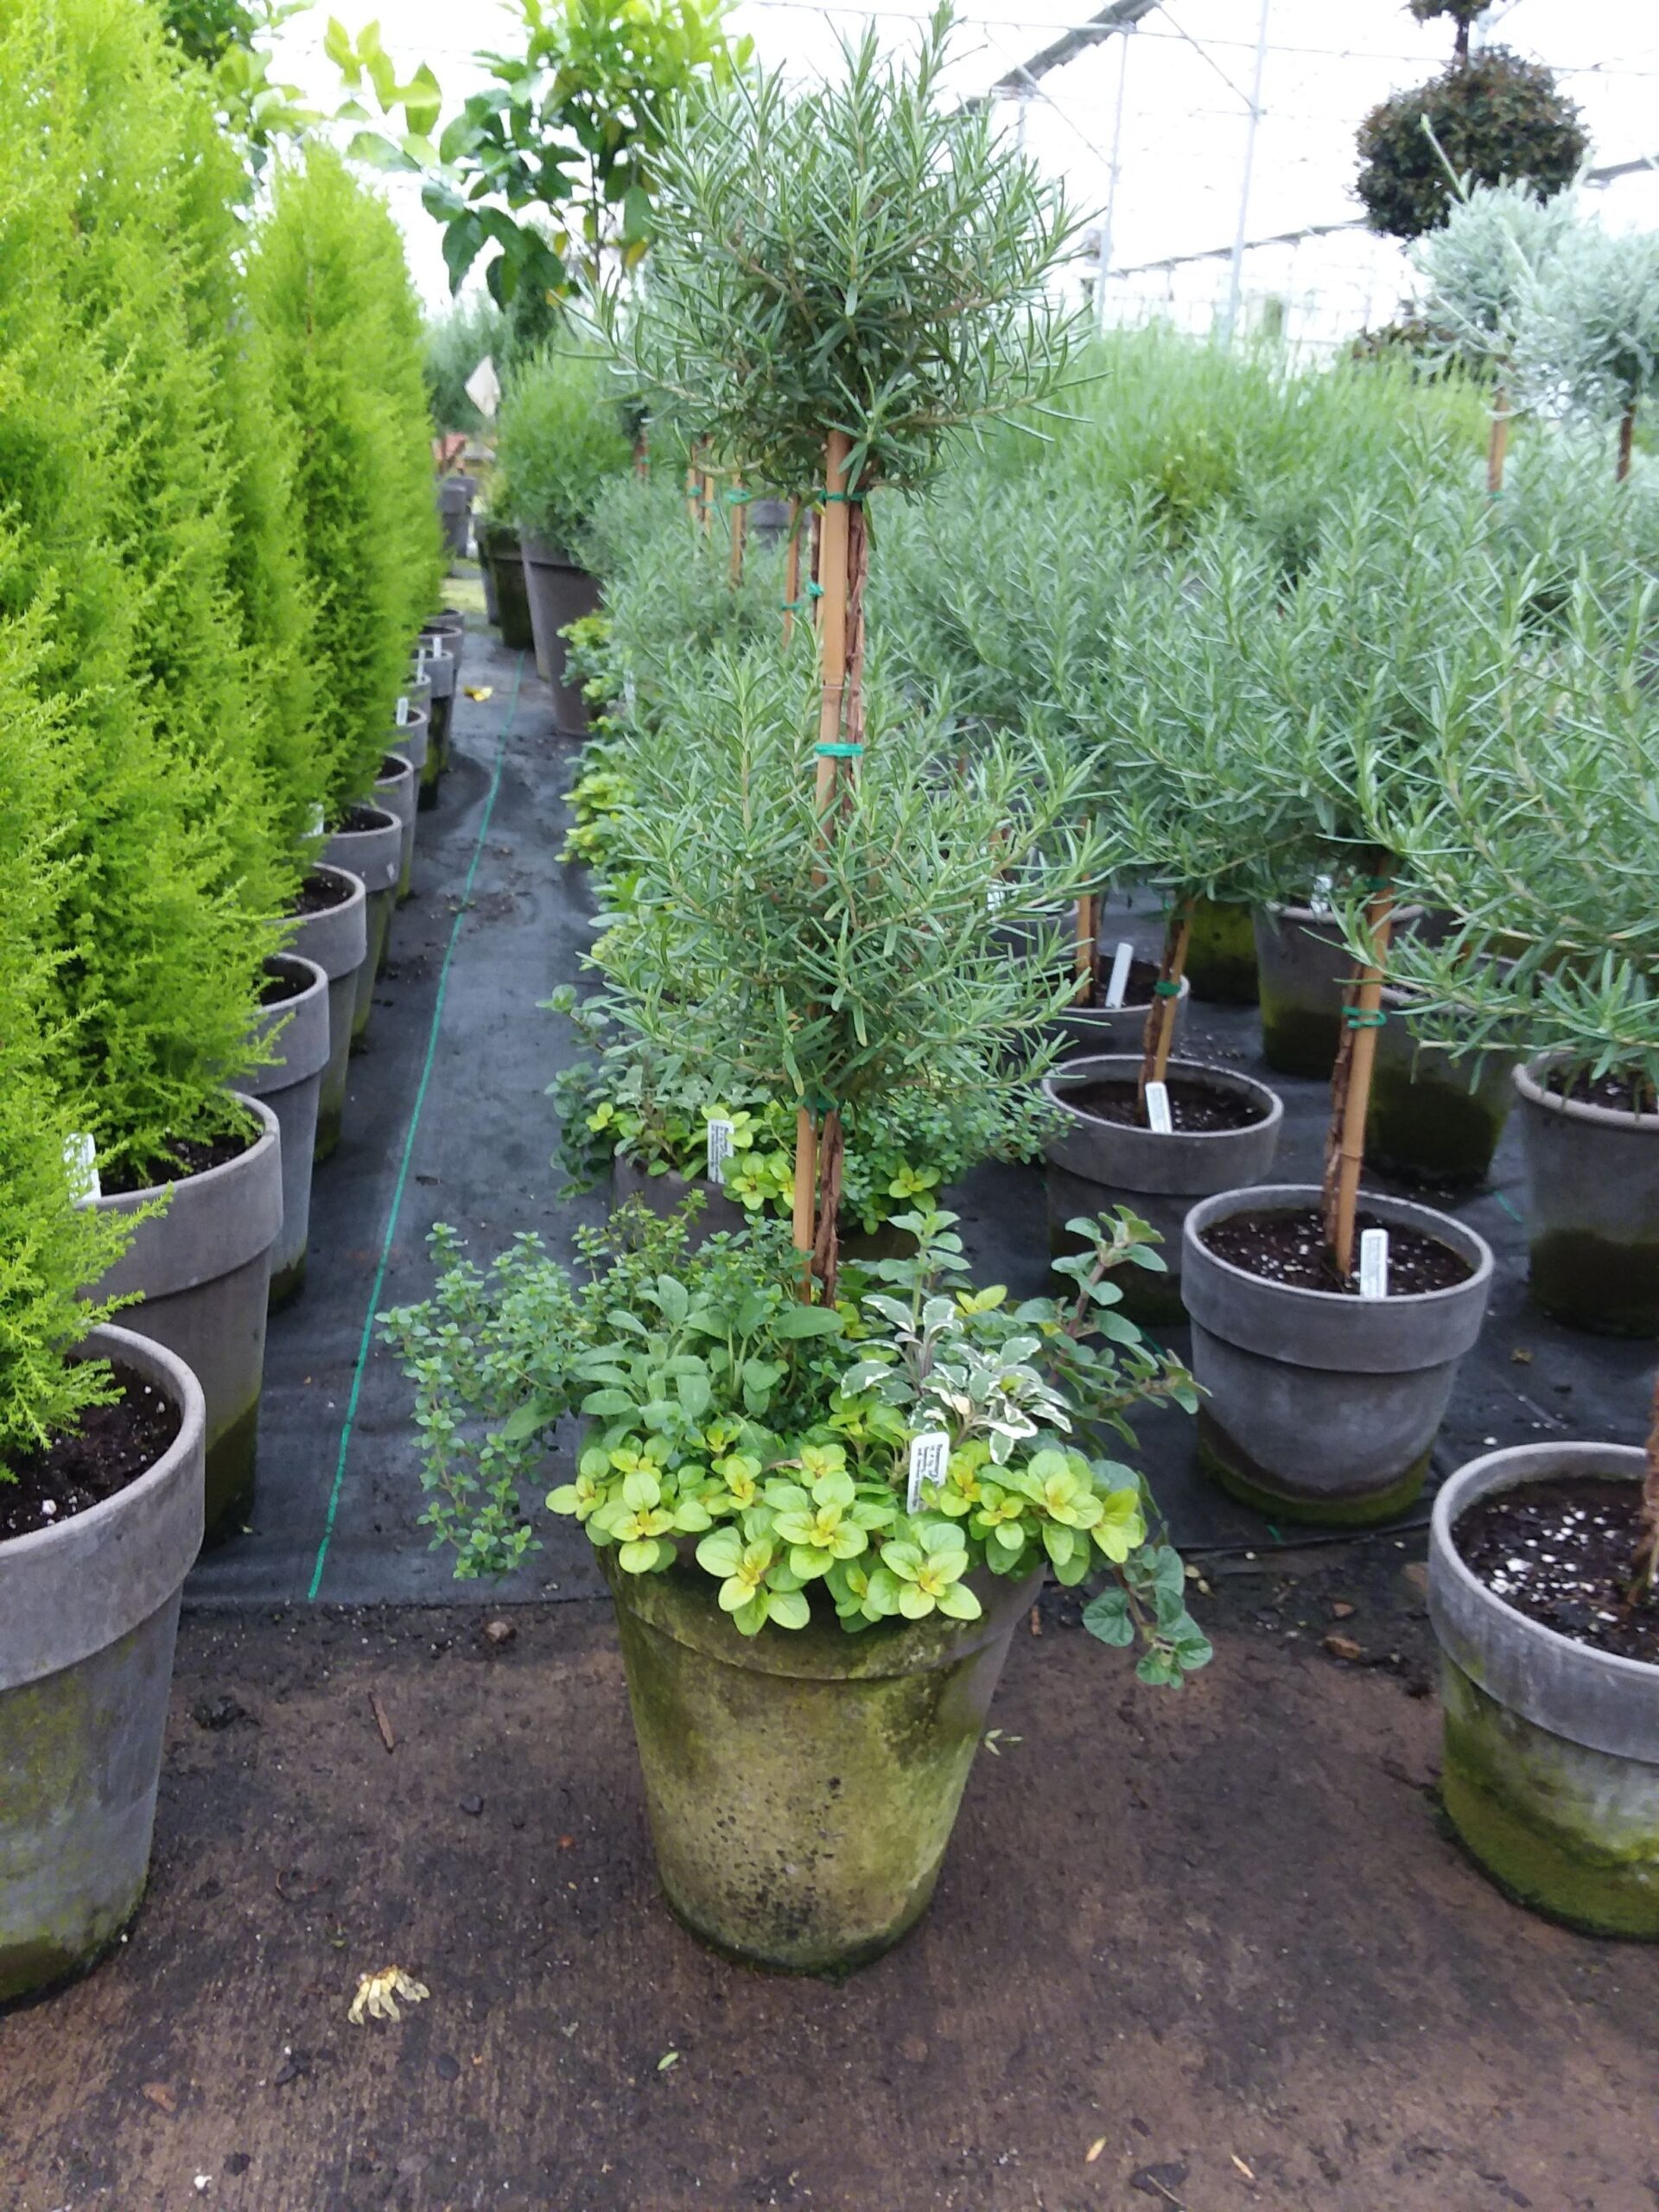 Rows of Rosmary double topiaries with various herbs surrounding the base